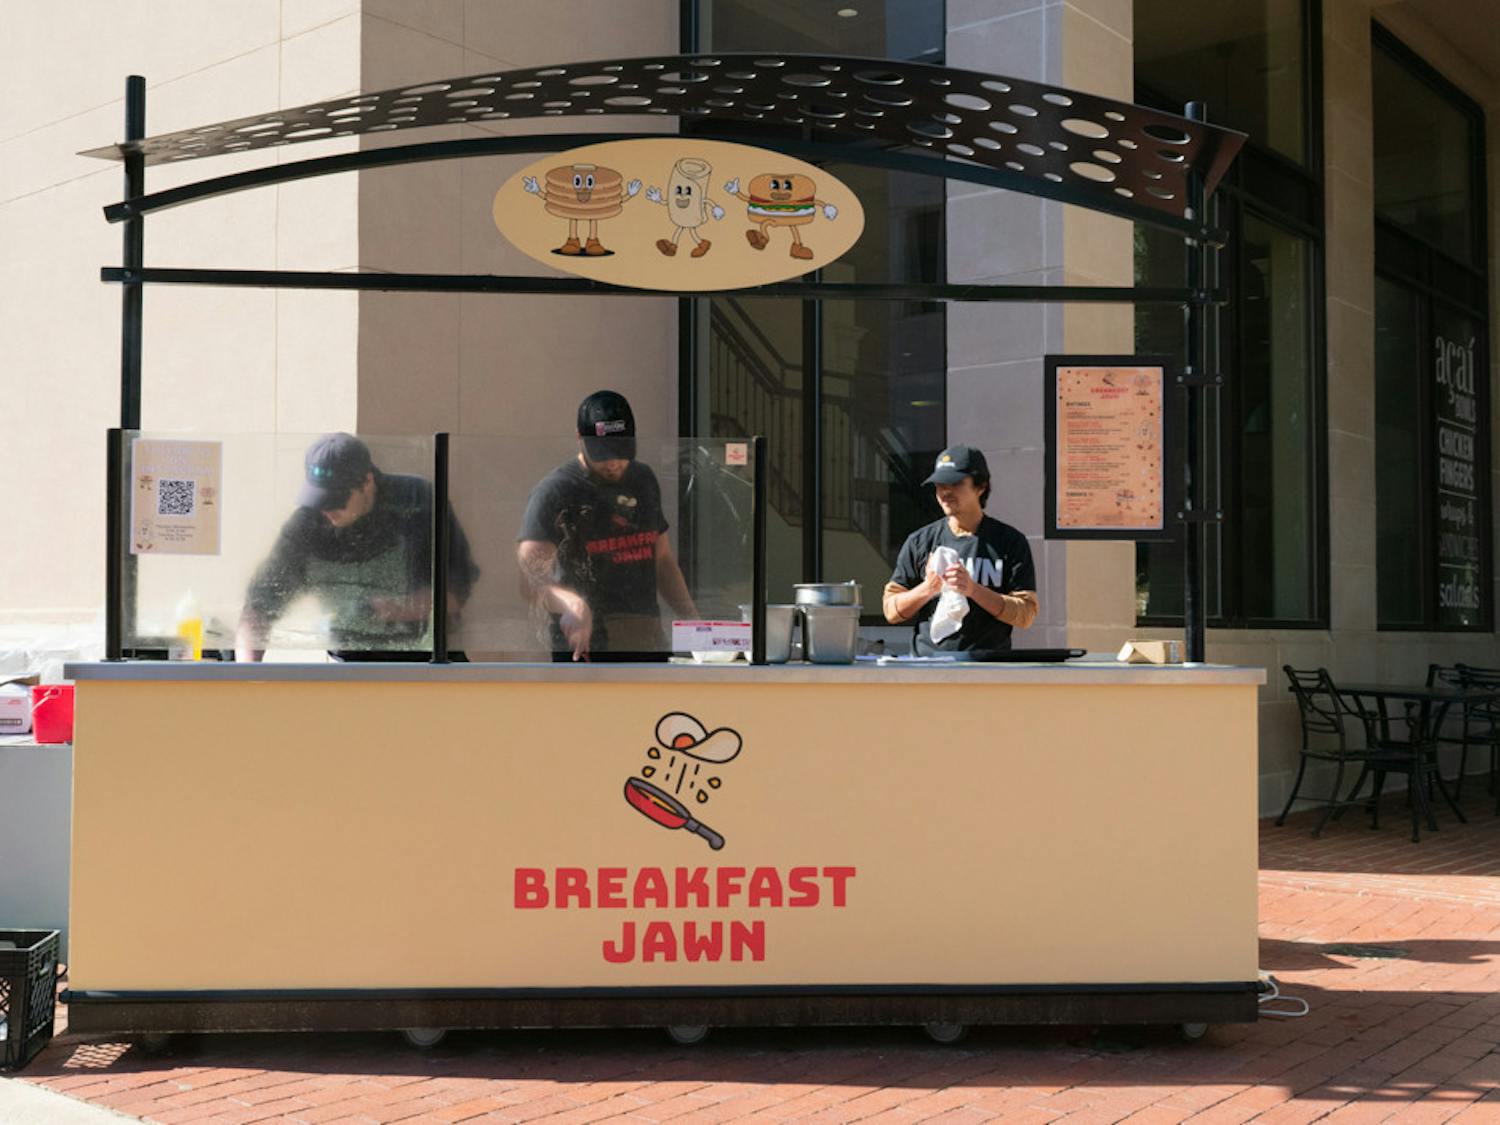 A new breakfast service location, Breakfast Jawn, is open Mondays and Wednesdays from 8 to 11 a.m. and Tuesdays and Thursdays from 8 a.m. to noon. It operates out of a cart in front of Colloquium Café on the northern side of campus.